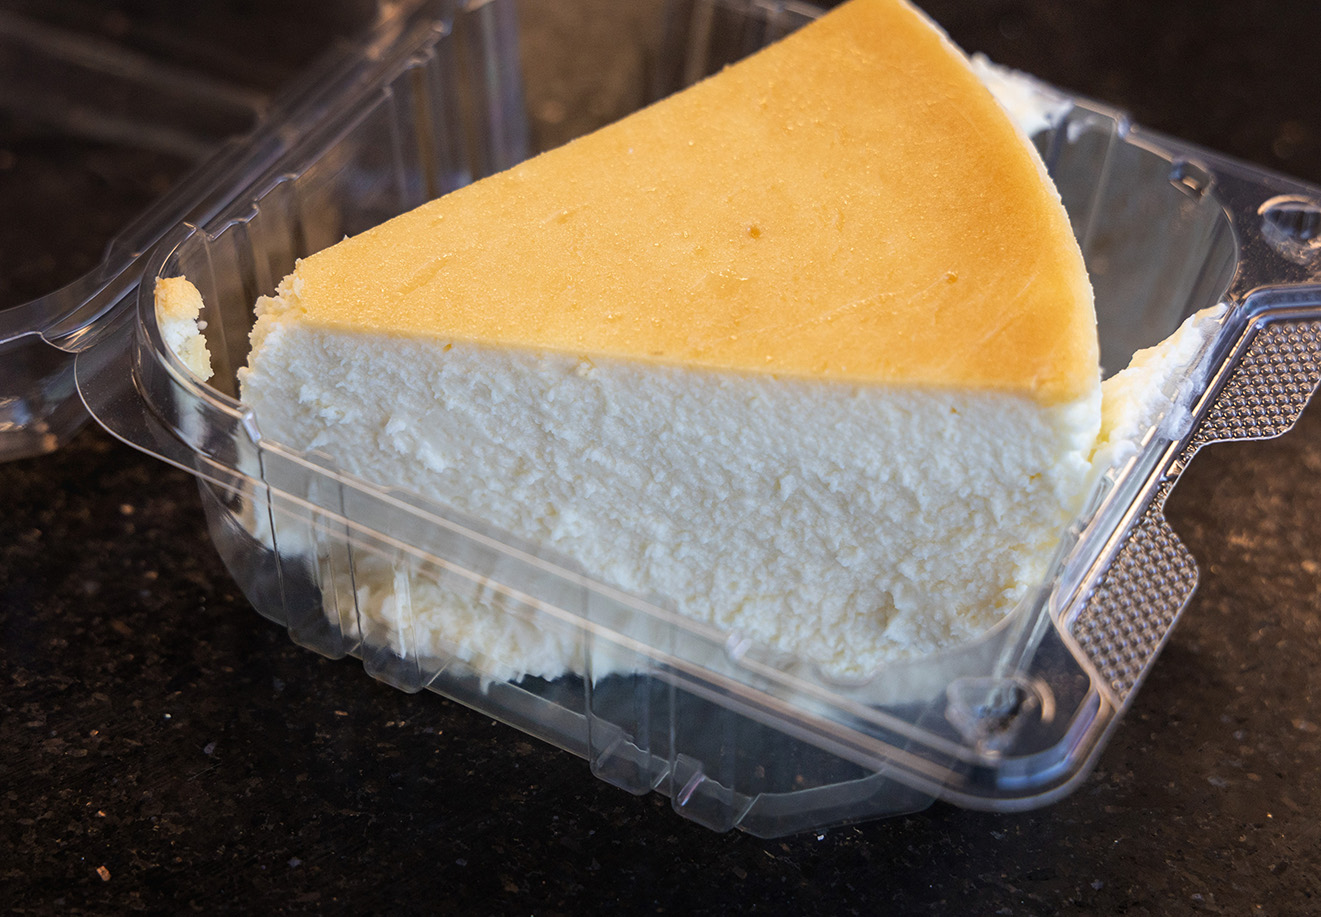 Cheesecake - Brooklyn City Pizzeria and Market in Laguna Niguel, California (Photo by Julie Nguyen)